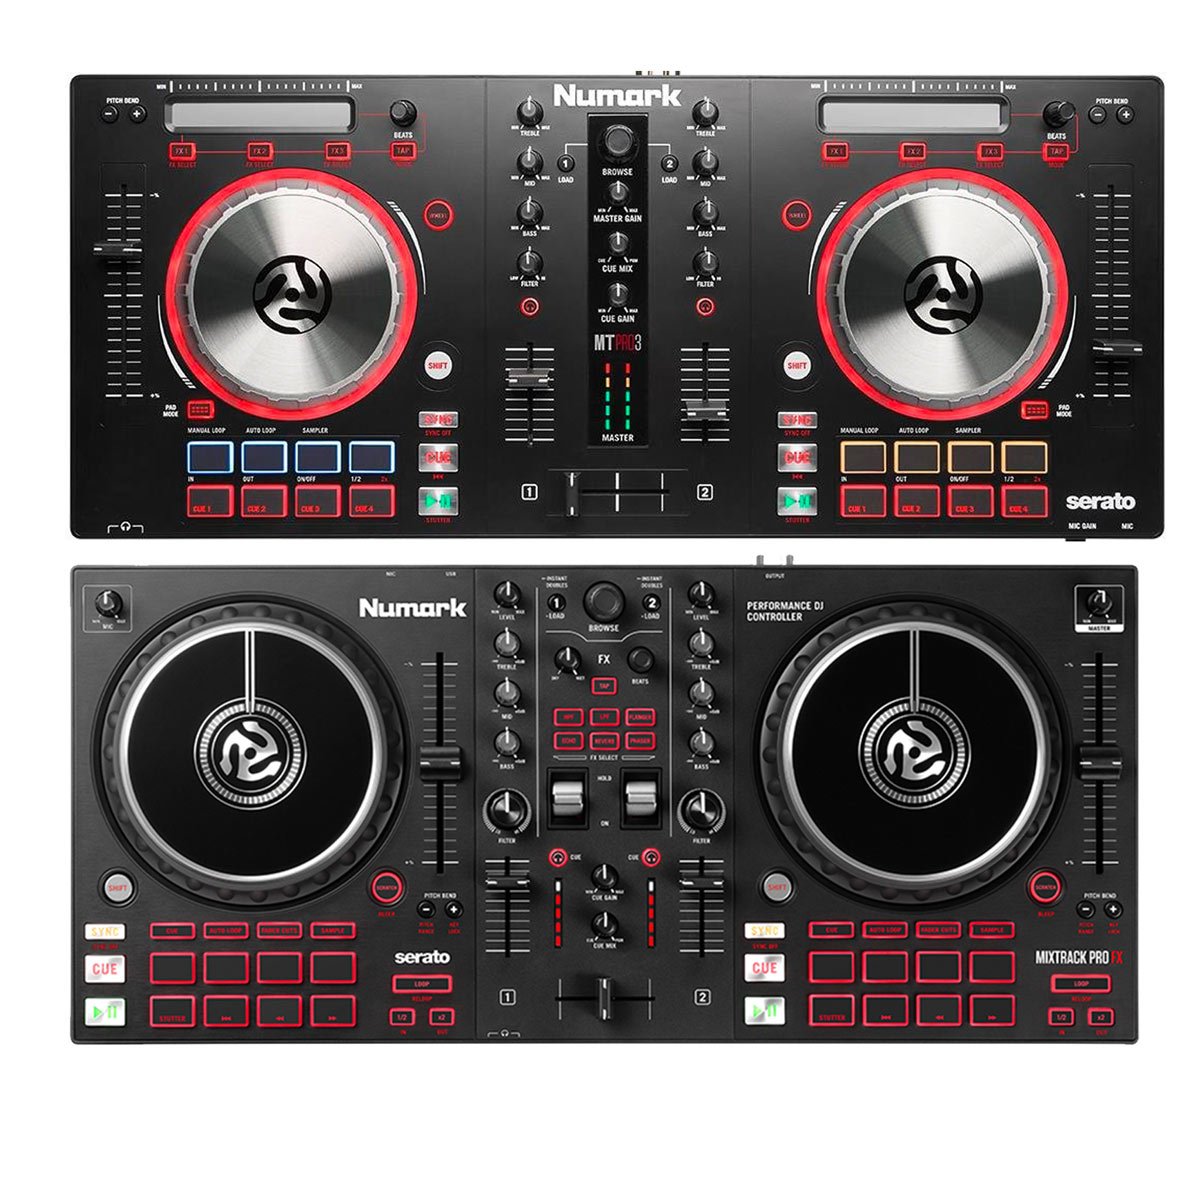 New Numark Mixtrack Pro FX and Mixtrack Platinum FX whats the